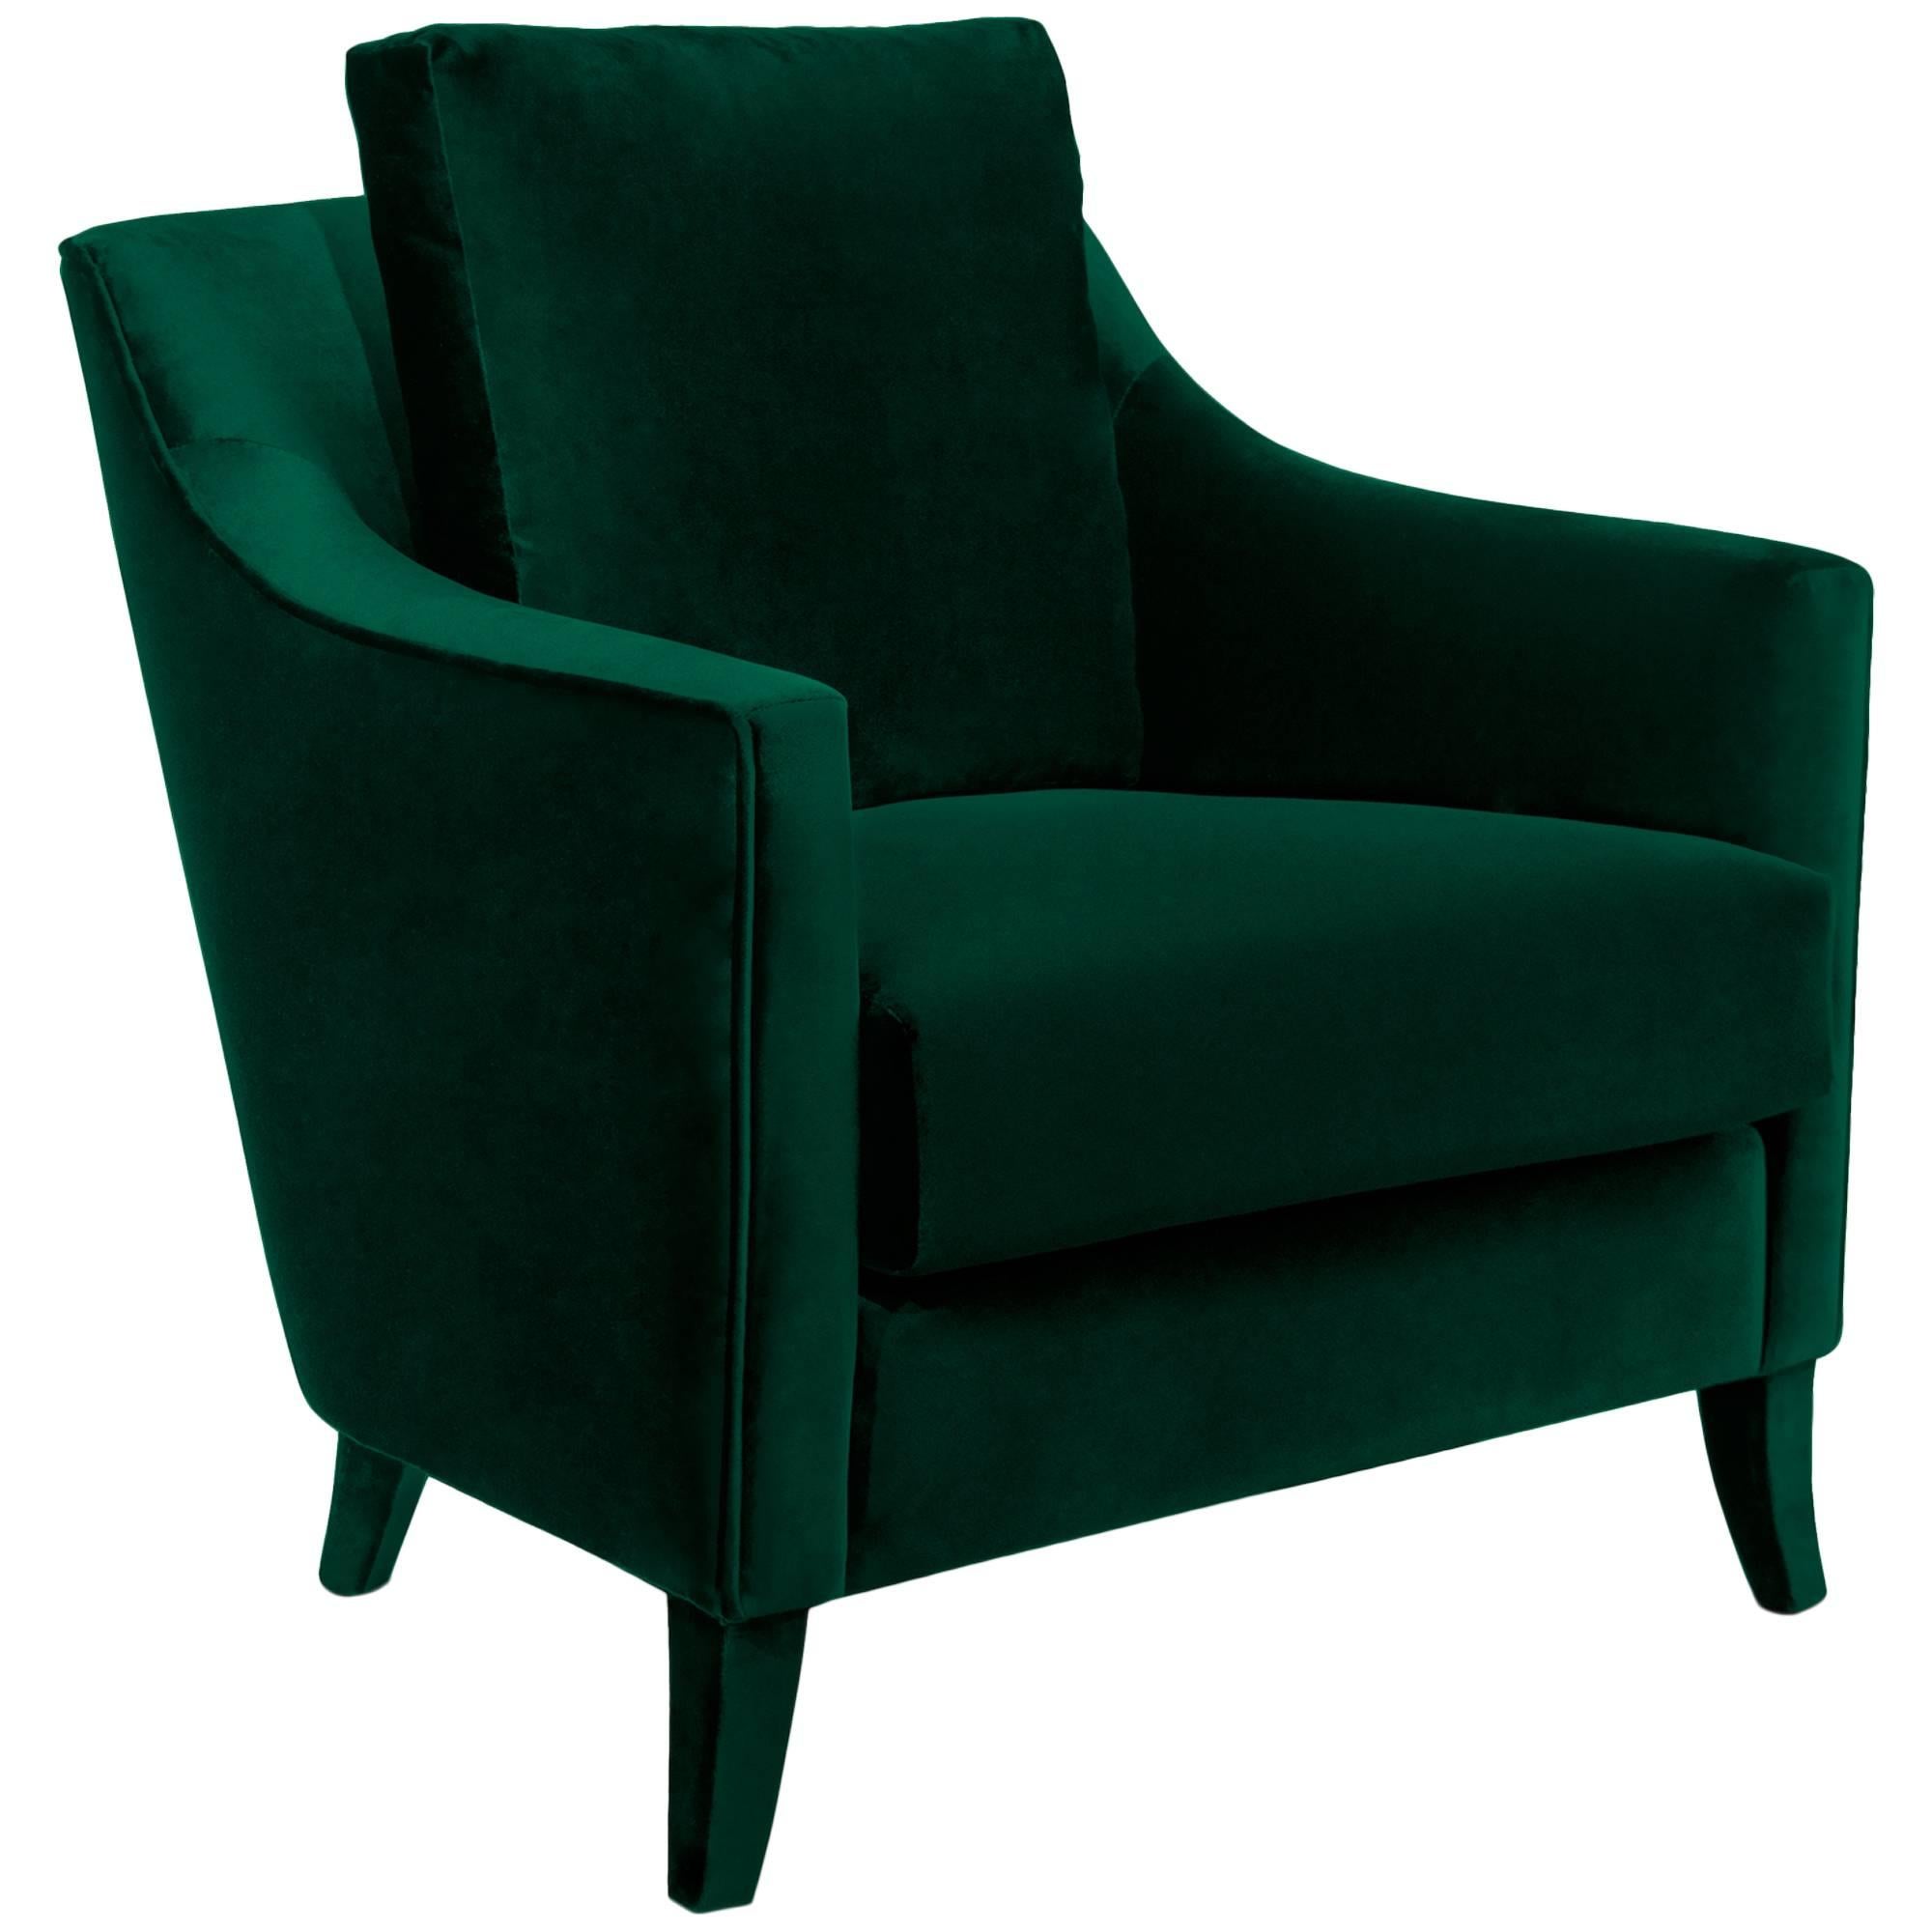 British Green Armchair covered with Velvet For Sale